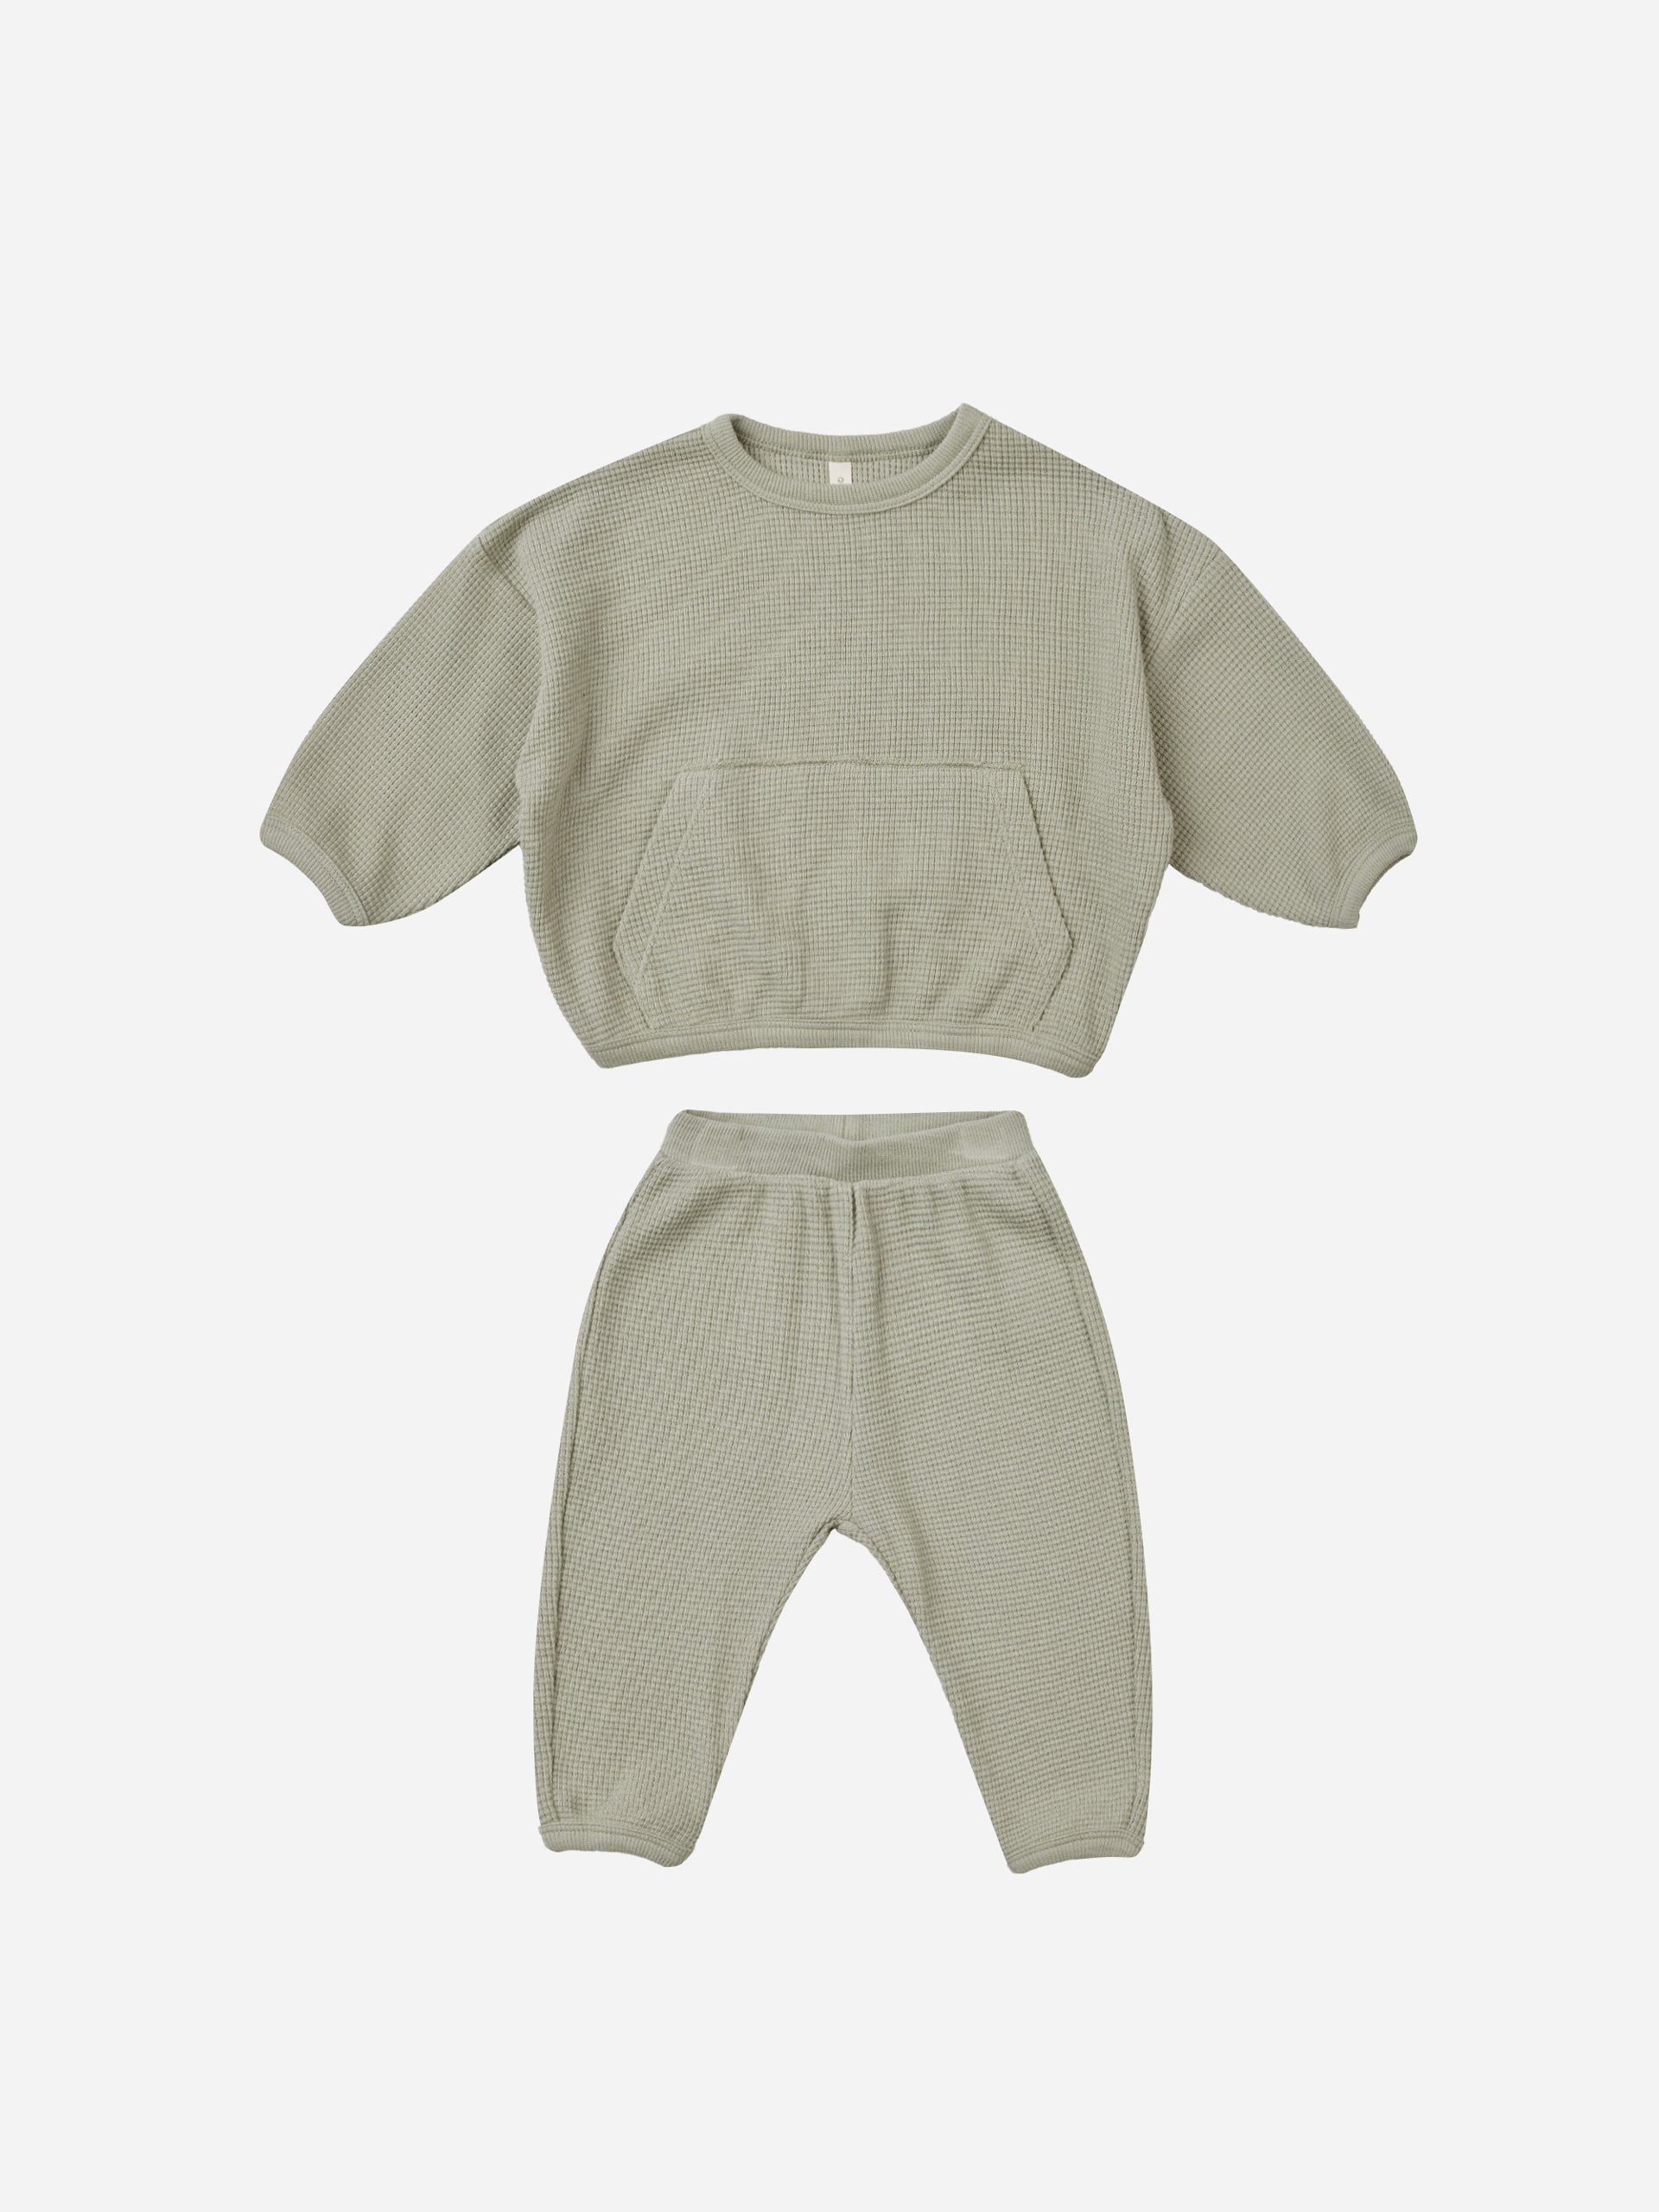 Waffle Slouch Set || Sage - Rylee + Cru | Kids Clothes | Trendy Baby Clothes | Modern Infant Outfits |